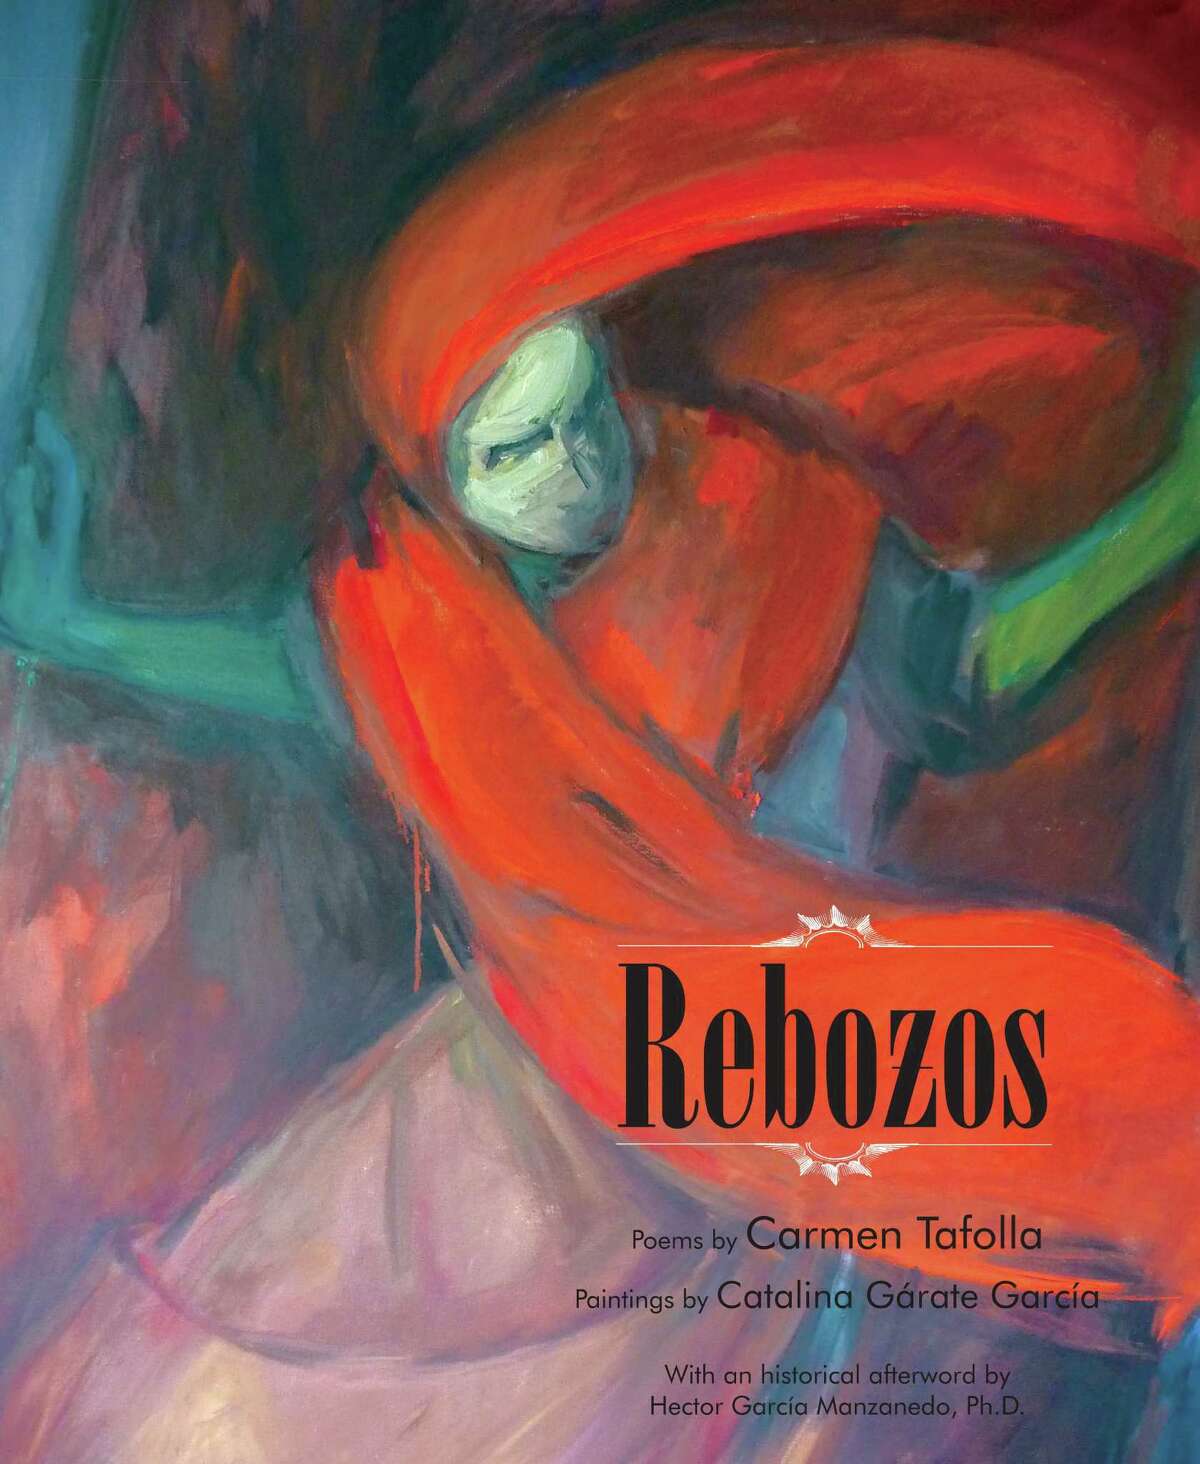 “Rebozos” — which features passionate poems by San Antonio’s Poet Laureate Carmen Tafolla and haunting paintings by California artist Catalina Gárate García — is a magnificent art book that recreates the originality of Mexican rebozos in vivid images and colors.